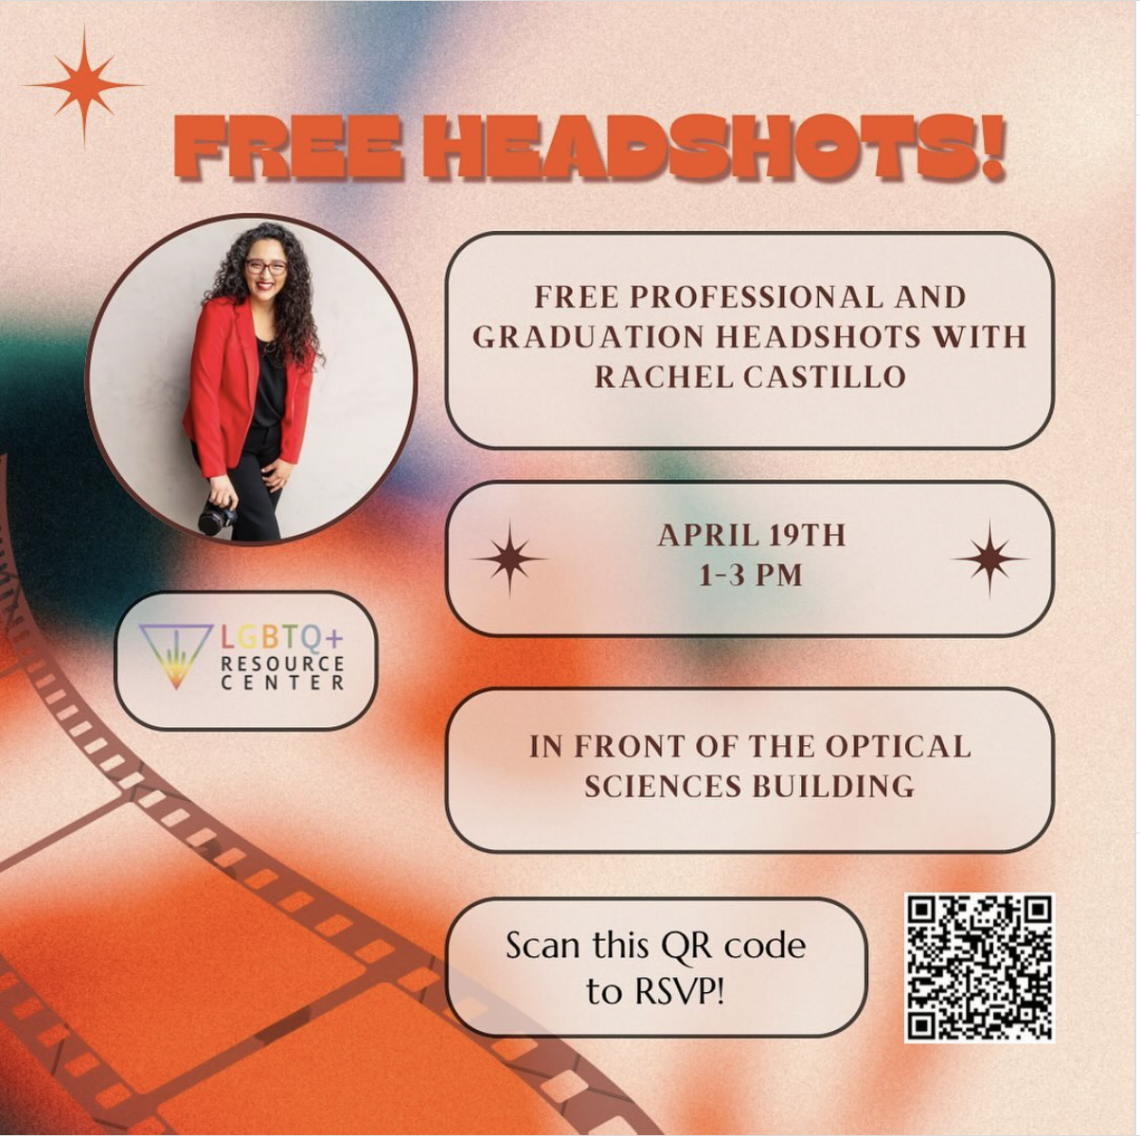 red blurry background. photo of a person with long curly brown hair wearing a red blazer and holding a camera. text reads: free headshots! free professional and graduation headshots with rachel castillo. april 19th, 1-3 pm. in front of the optical sciences building. scan this QR code to RSVP! (next to QR code).